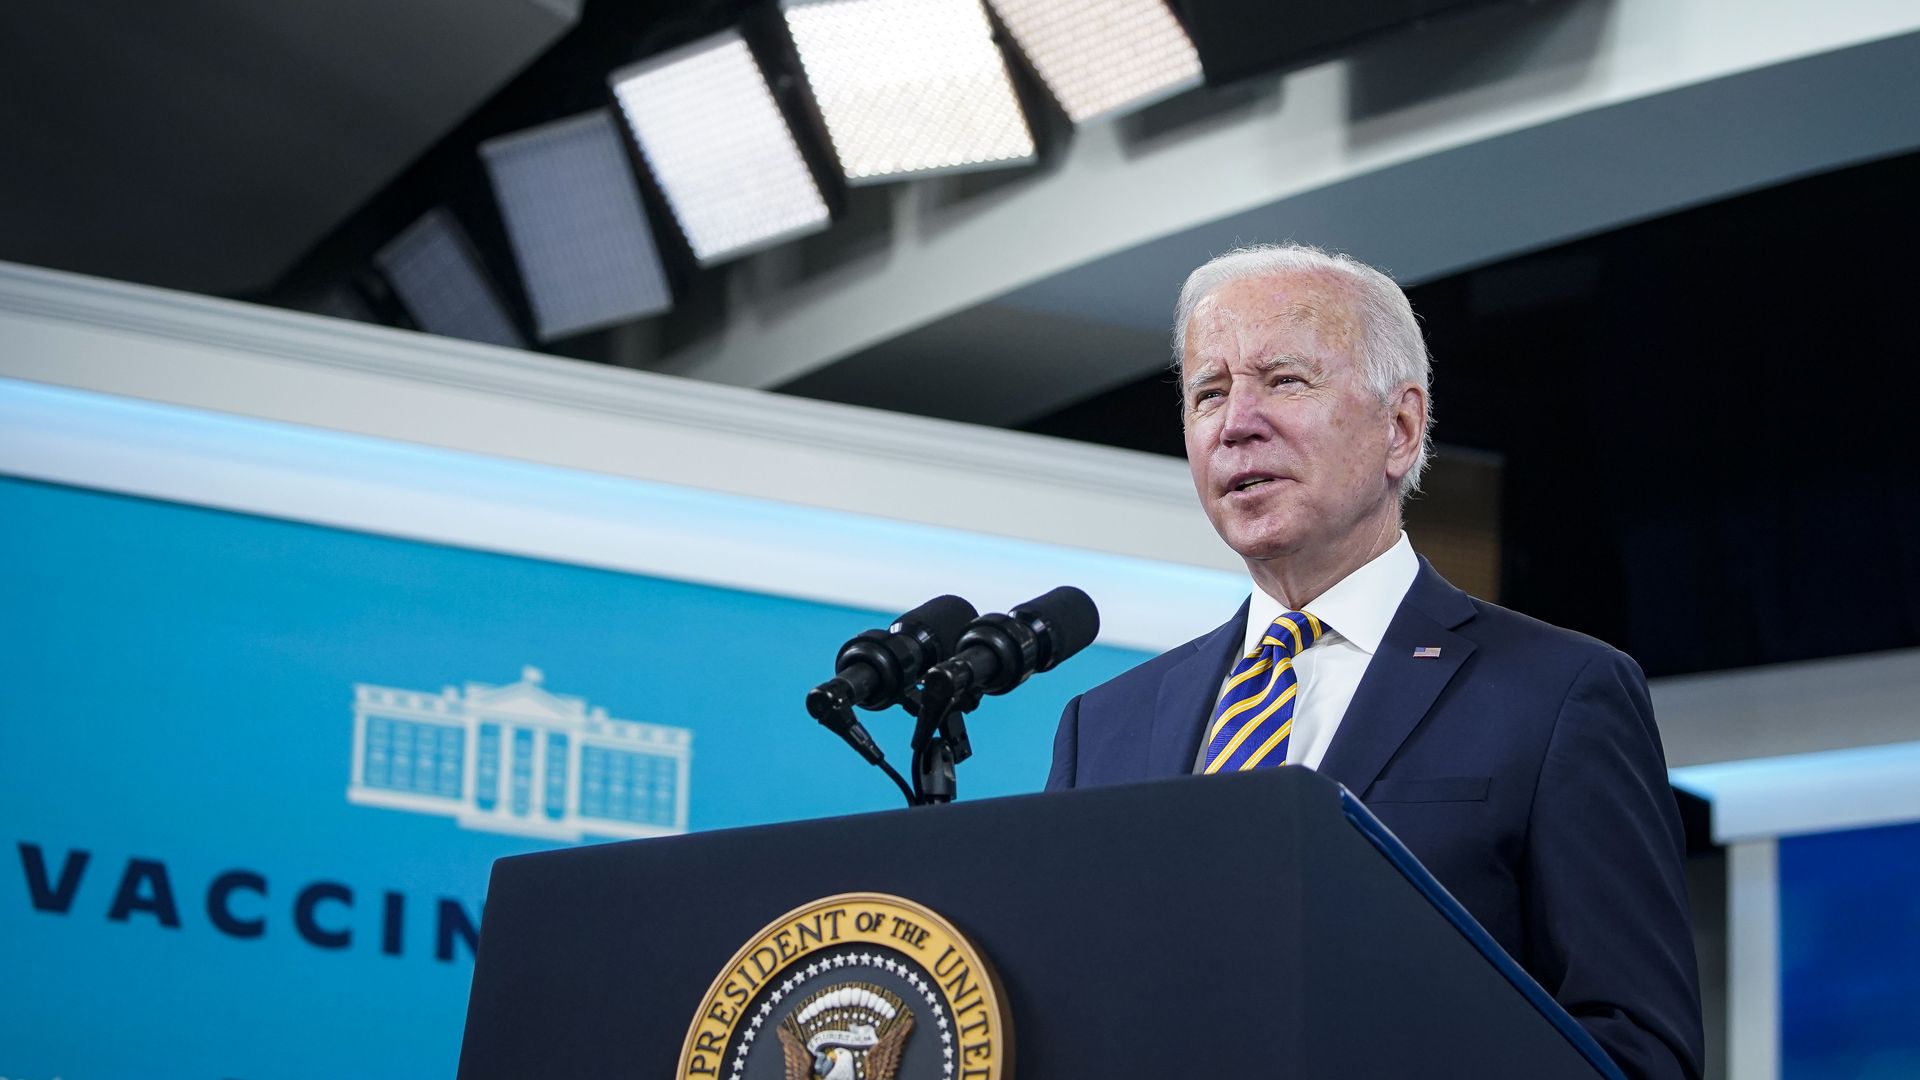 Photo of Joe Biden speaking into a mic at a podium with the White House seal